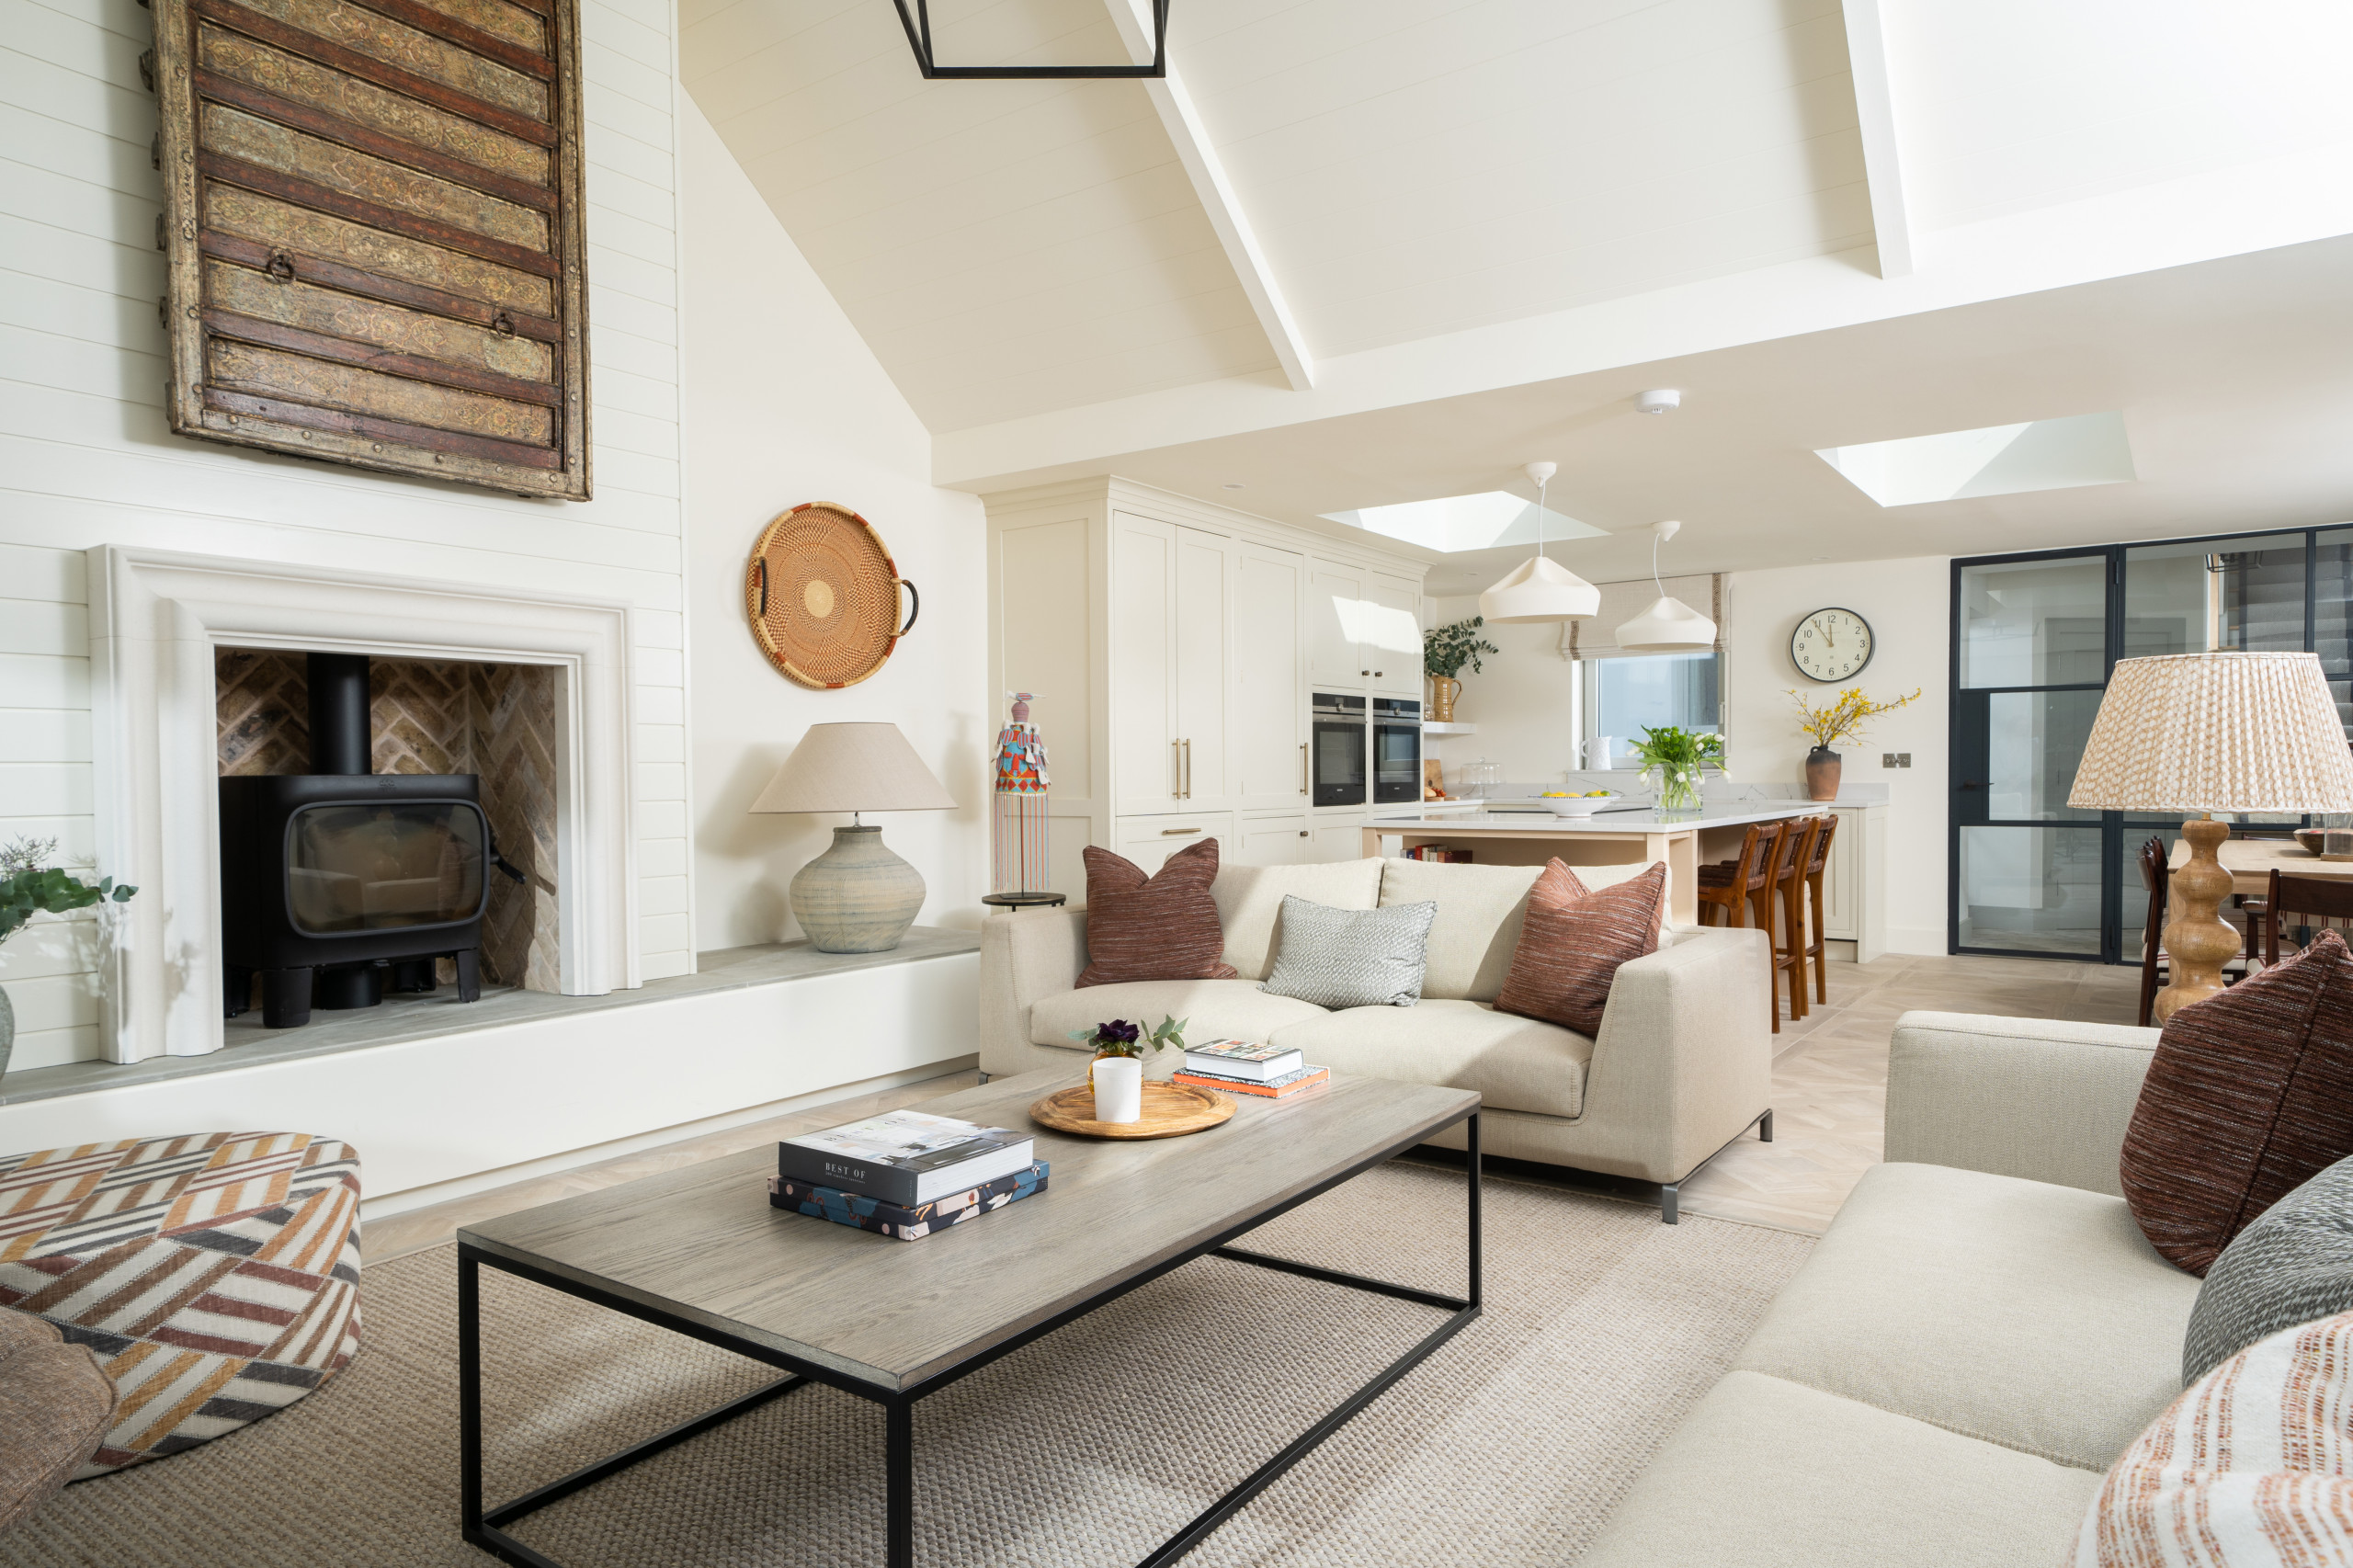 Home Design Ideas, Pictures & Inspiration - January 2024 | Houzz UK